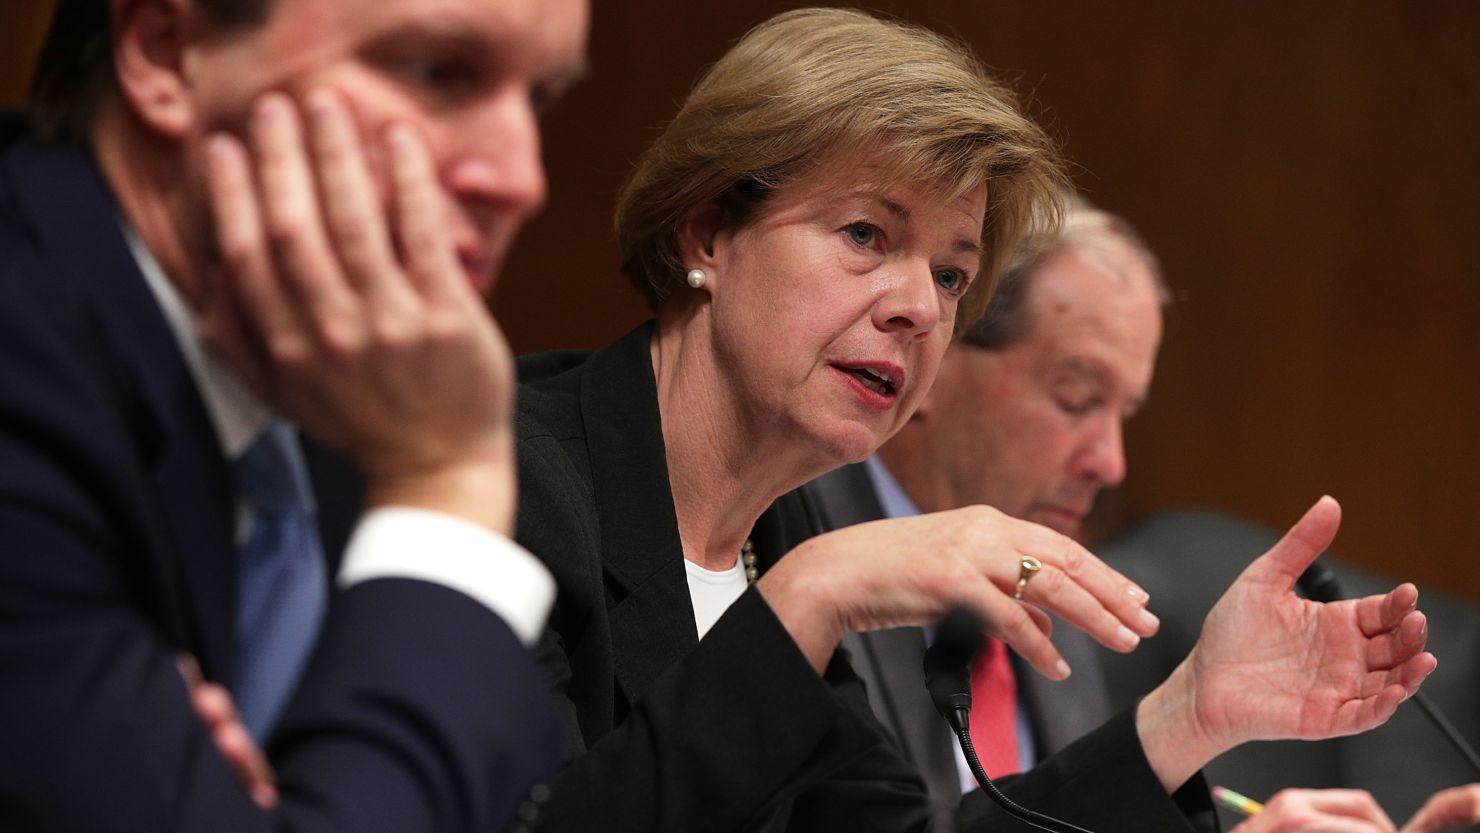 Sen. Tammy Baldwin speaks during a hearing before the Military Construction, Veterans Affairs, and Related Agencies Subcommittee of the Senate Appropriations Committee in November 2017.